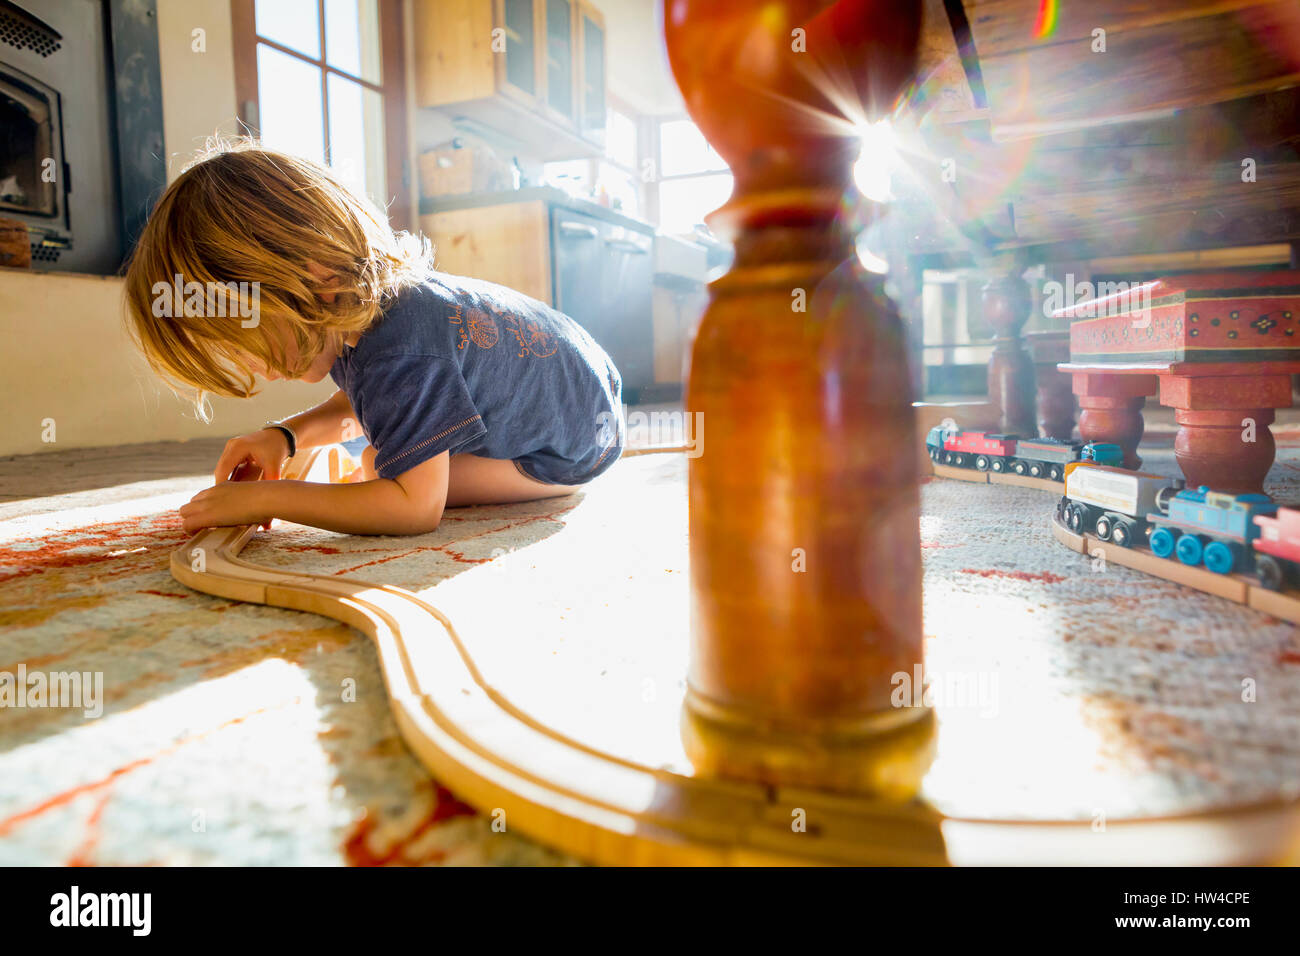 Caucasian boy playing with toy race track on floor Stock Photo